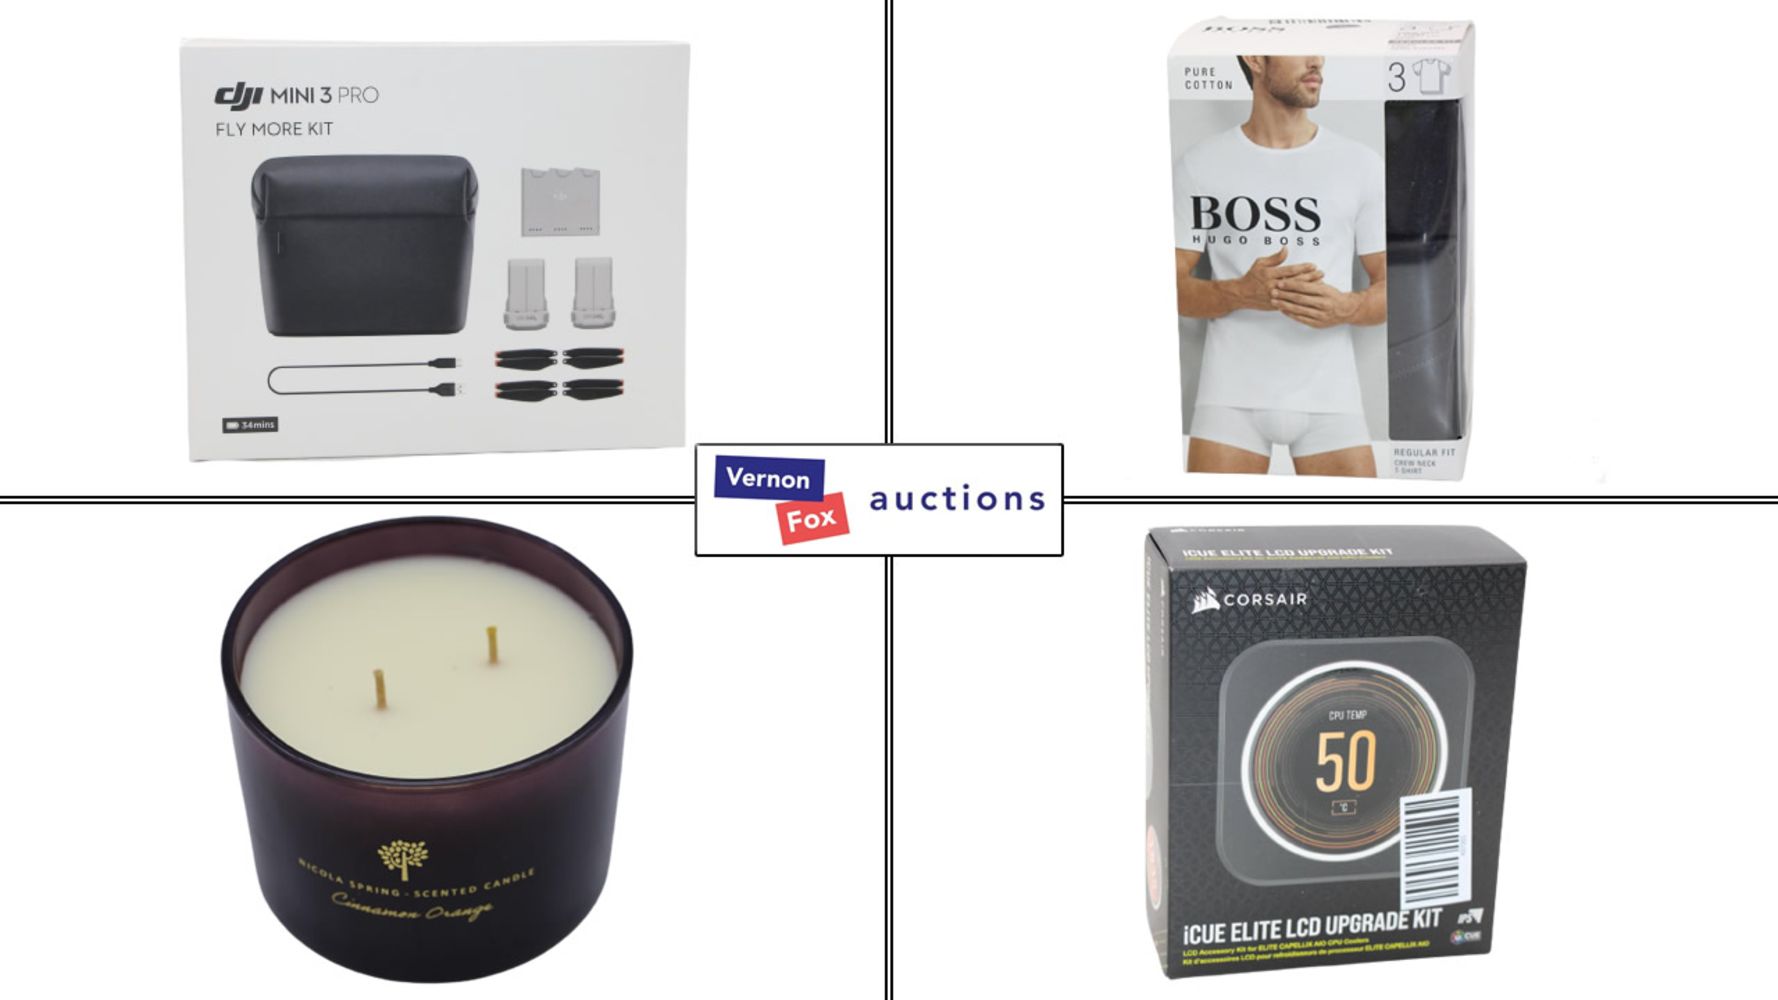 TIMED ONLINE AUCTION: IT Equipment, Toys, Beauty Products, Clothing and a wide range of Commercial and Industrial Goods, with FREE UK DELIVERY!